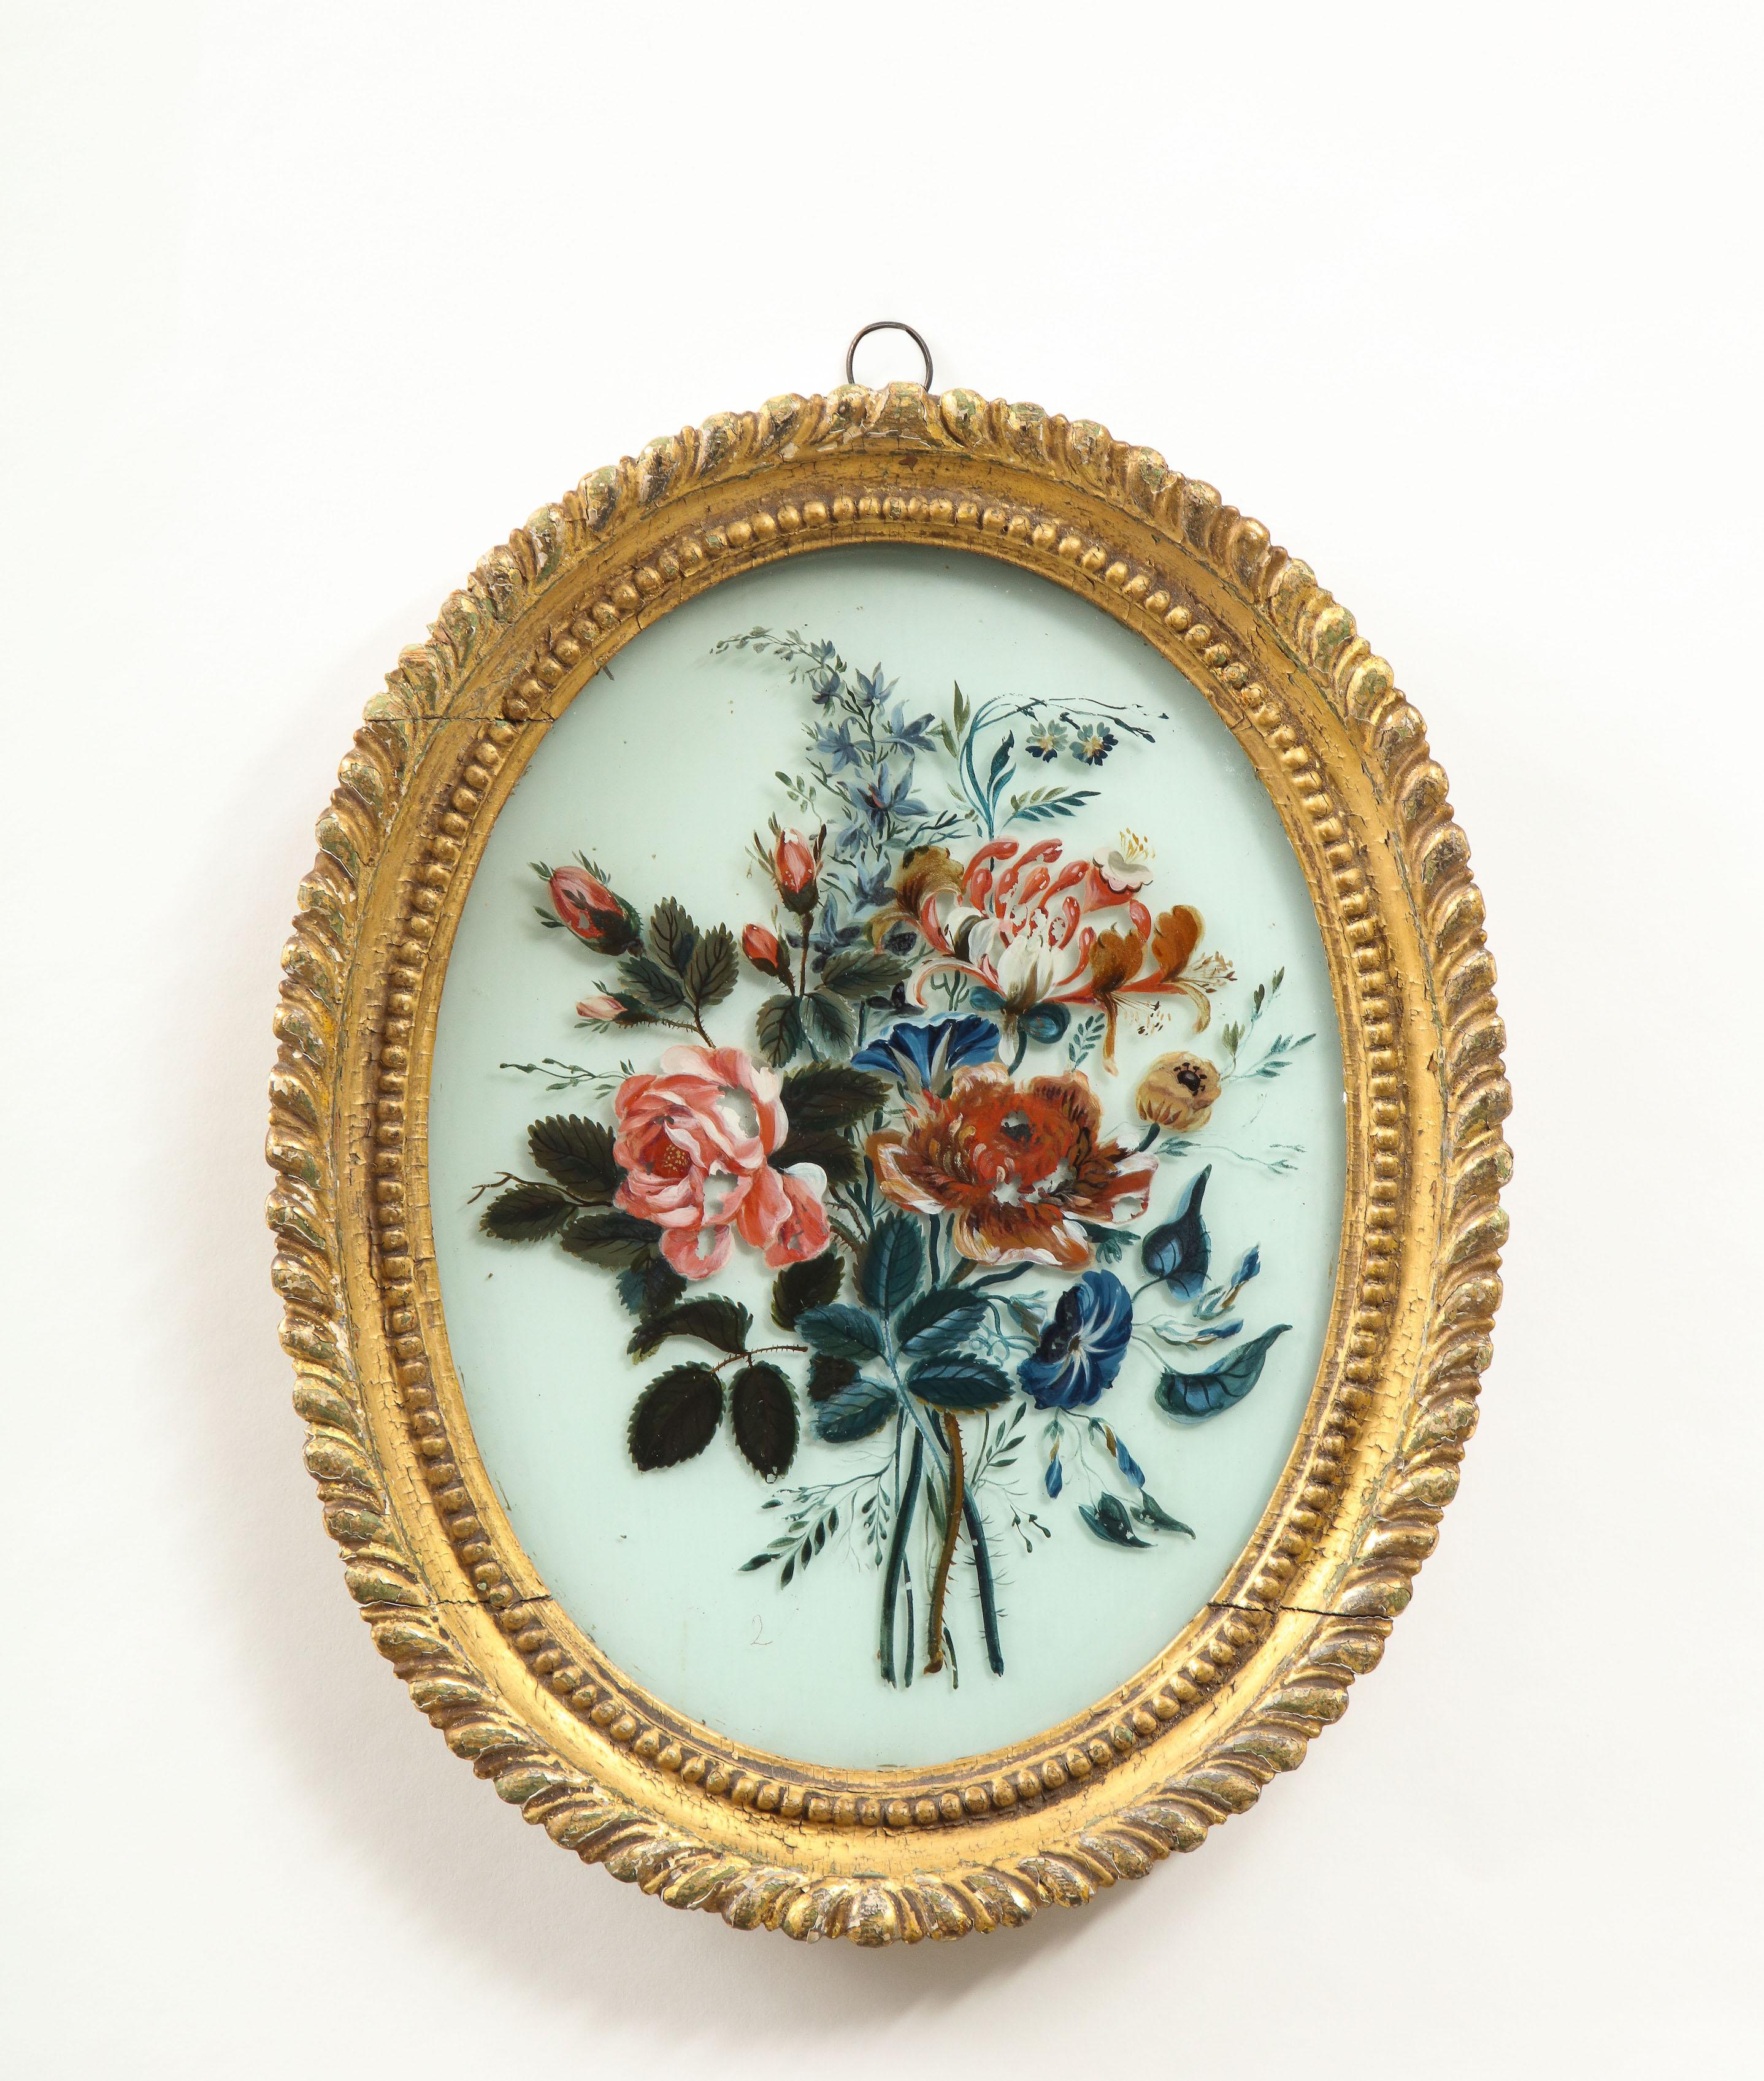 Each within an oval gilt gesso frame molded with foliate and beaded banding, depicting a floral bouquet including roses, morning glory, peonies, phlox and auricle, on a white glass ground.